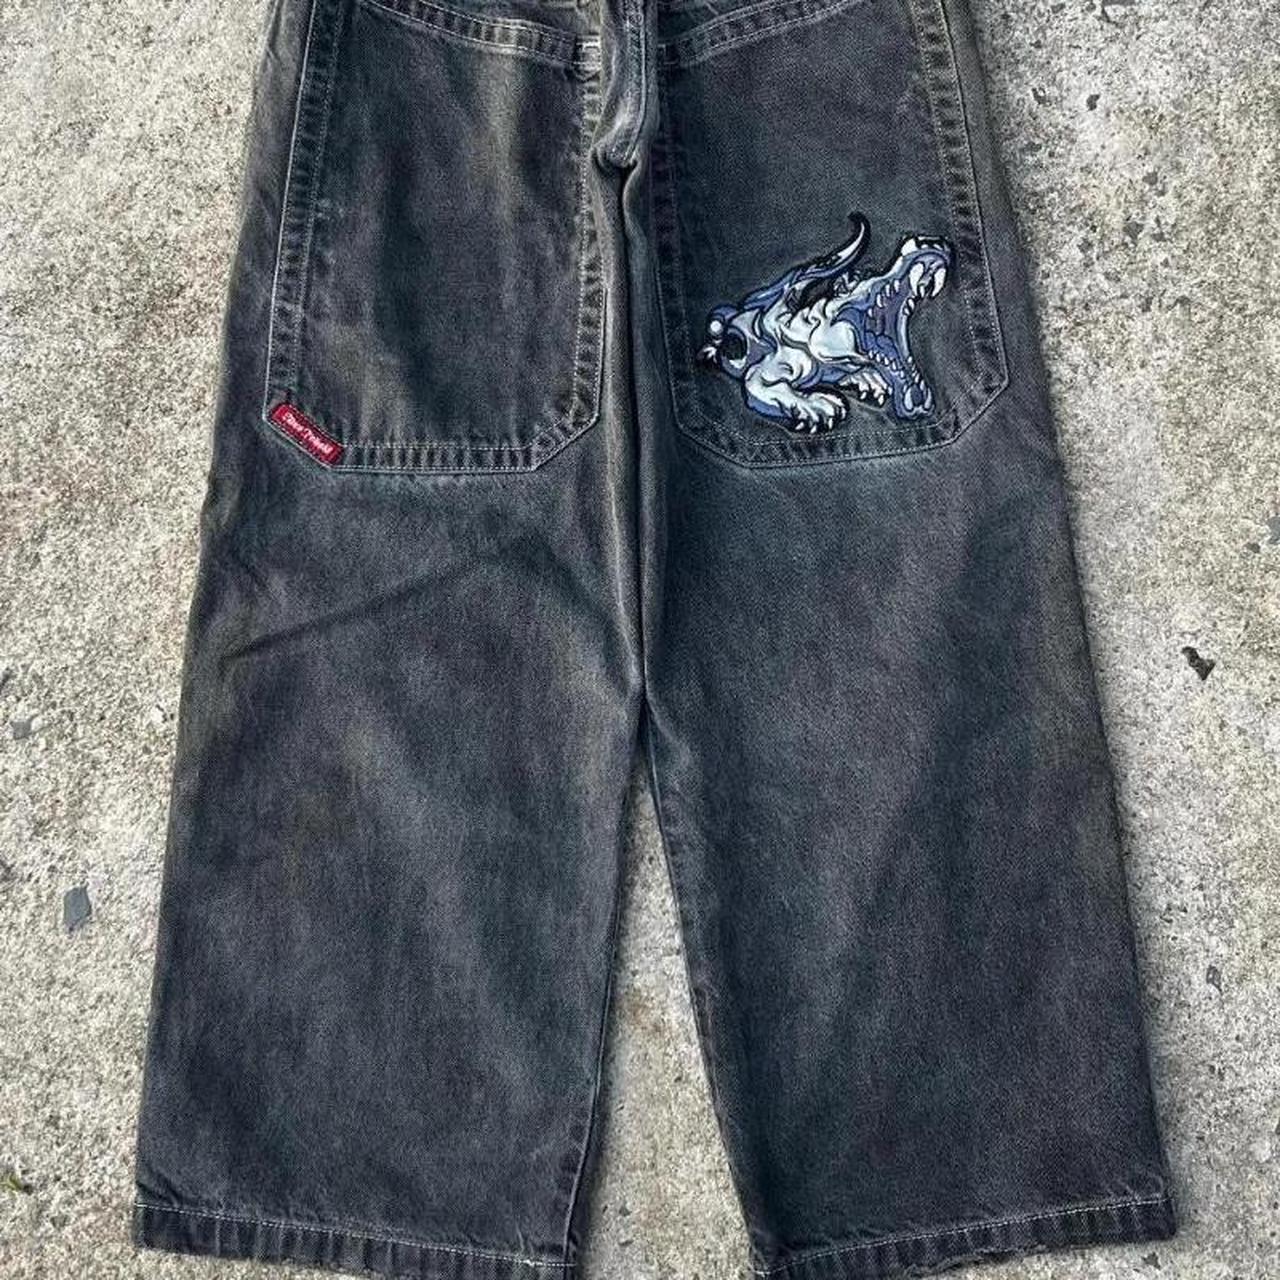 Sick pair of Jncos perfect for the baggy skater look - Depop